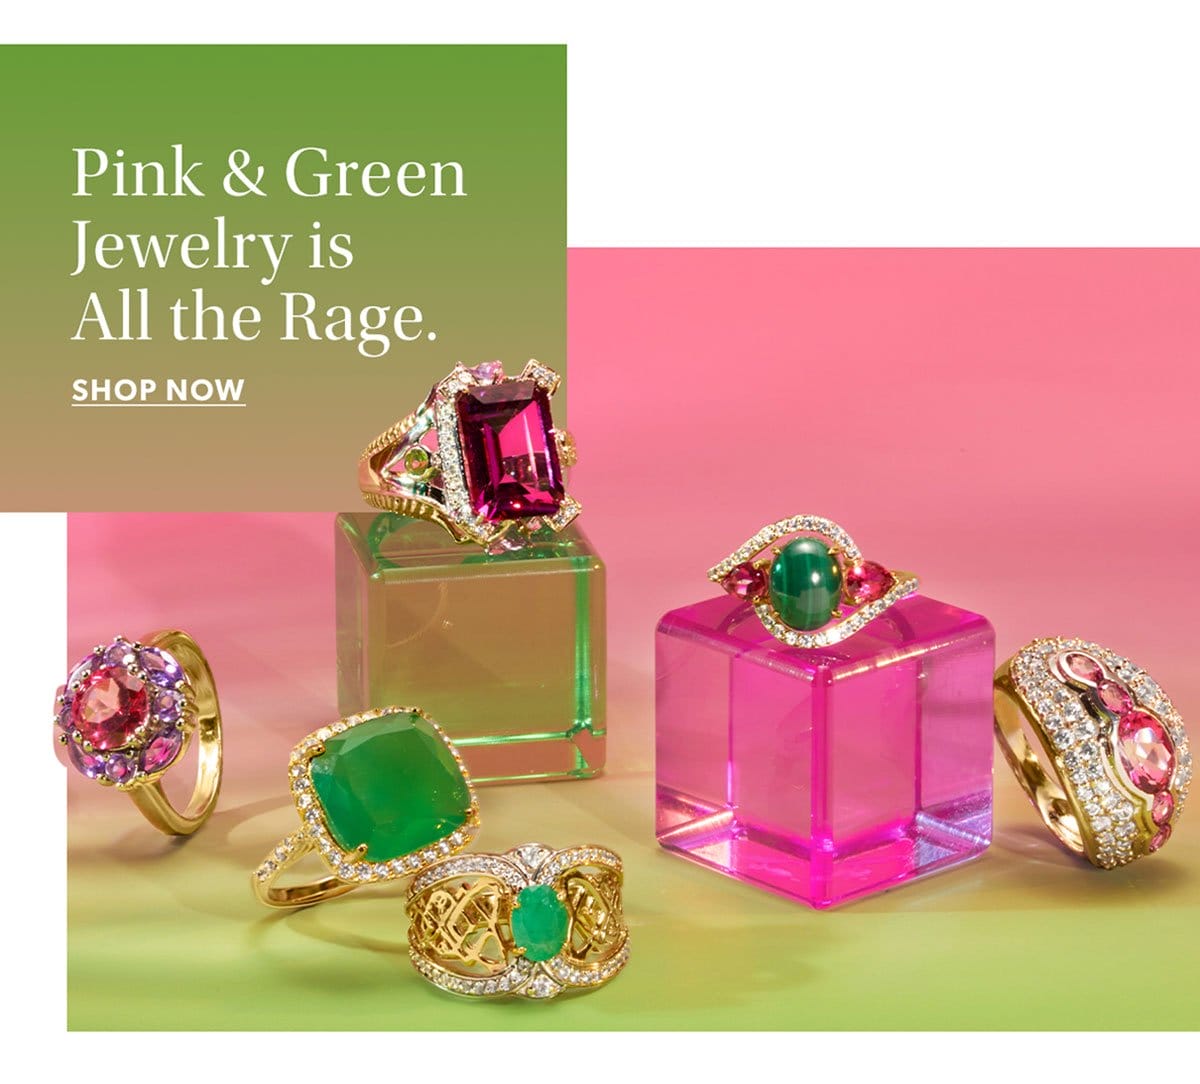 Pink & Green Jewelry. Shop Now